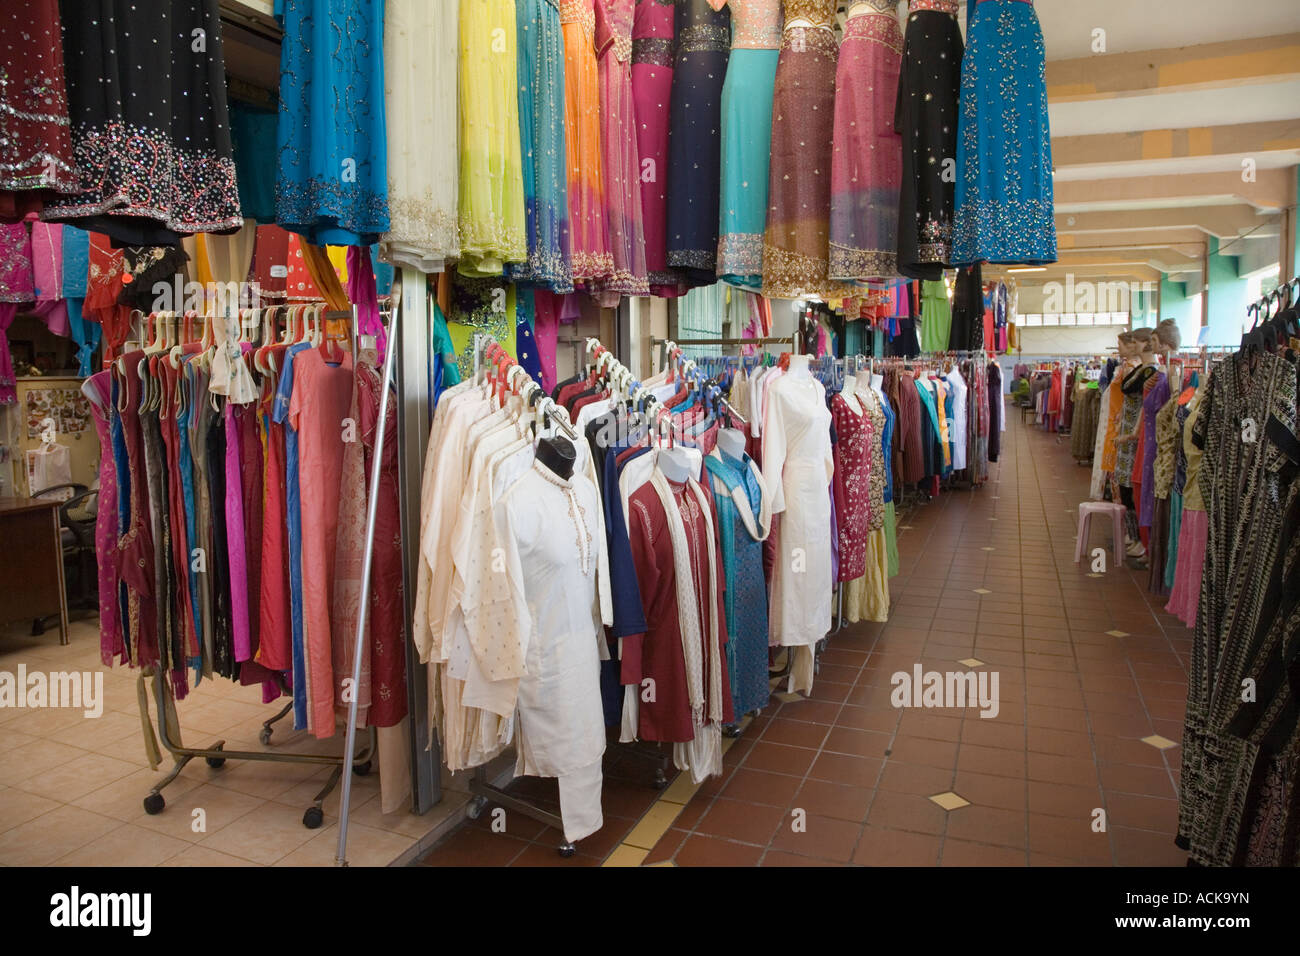 Indian ladies clothing hanging display for sale upstairs in Zhujiao centre market in ethnic neighbourhood of city Little India Singapore Stock Photo